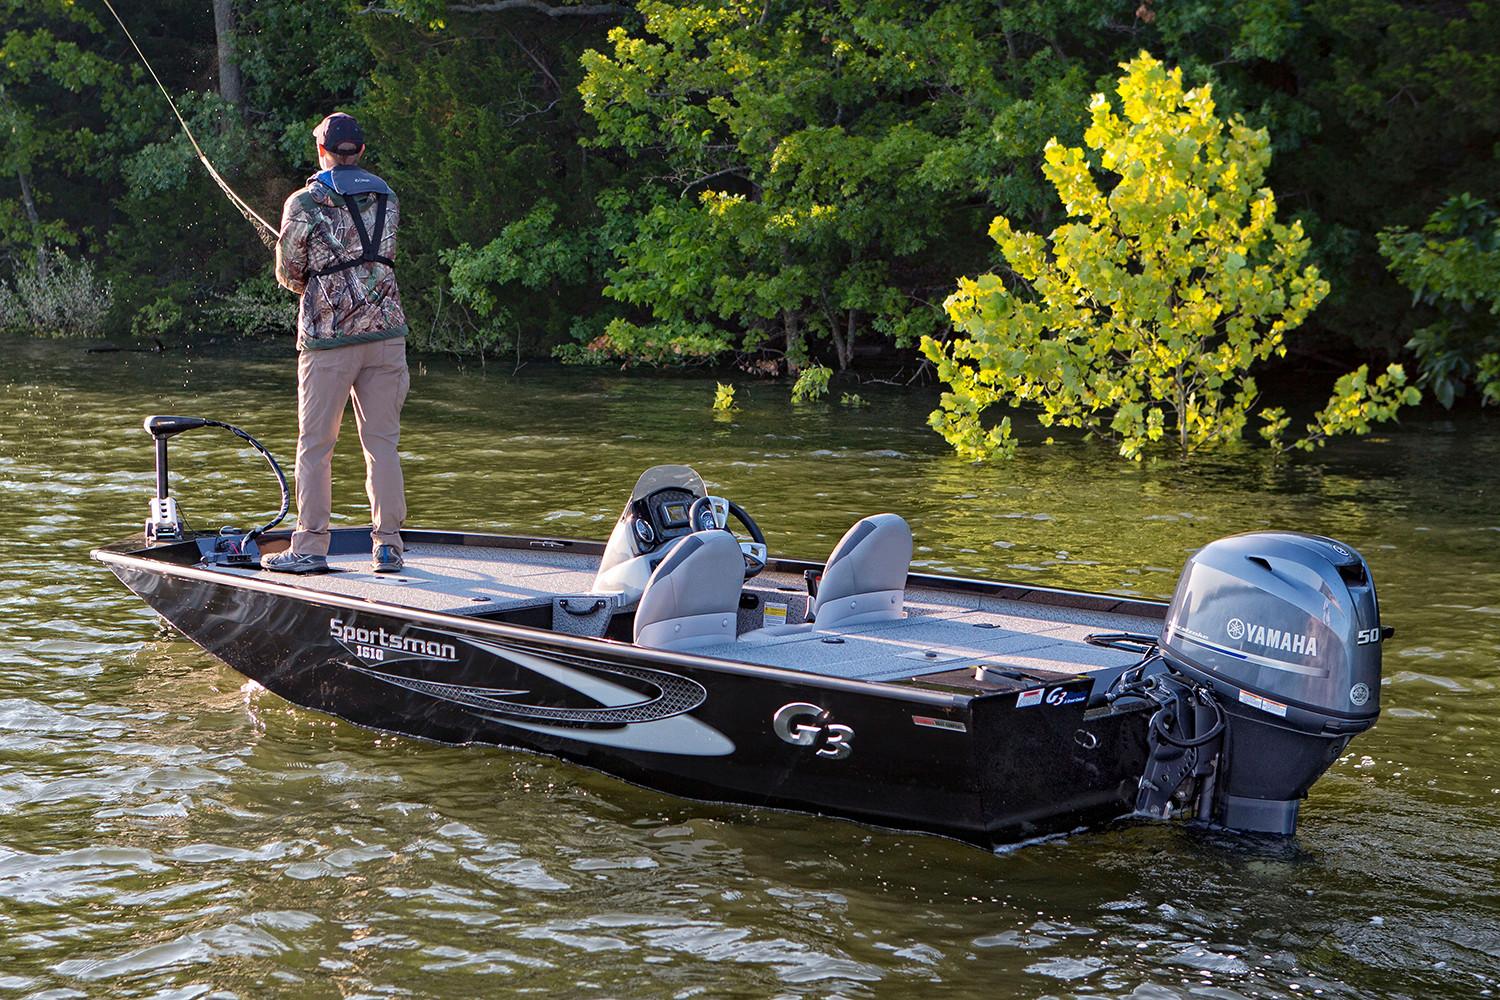 What are the most important considerations for sportsmen when hunting from a boat?